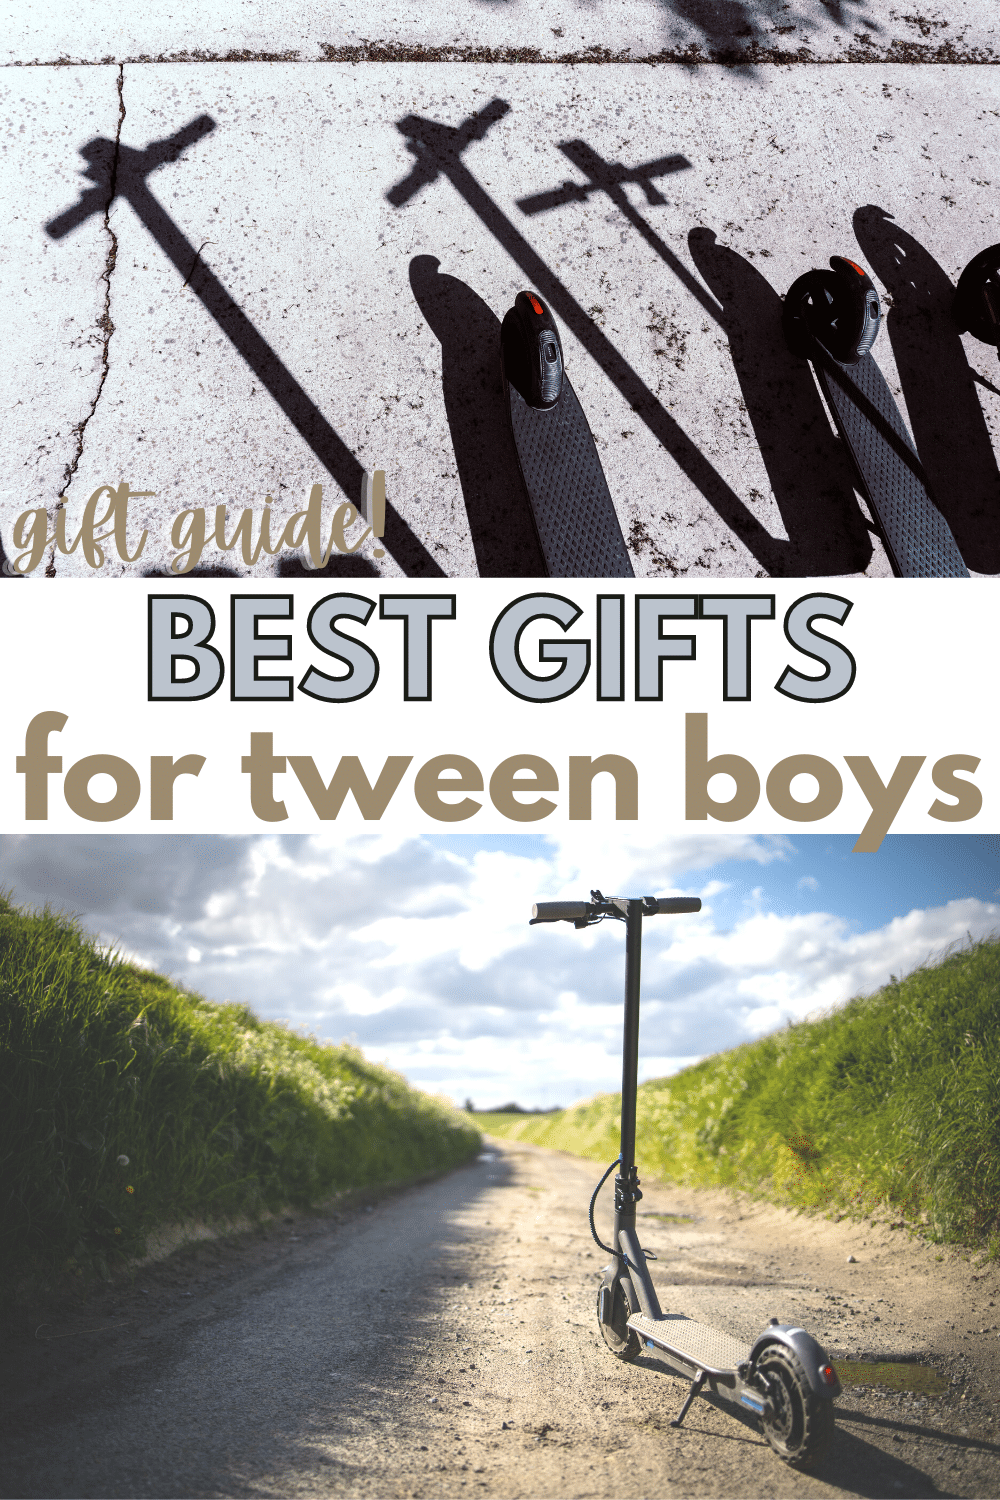 Tweens are hard to shop for. They aren't kids anymore, but they still like to play. Here's a list of the best gifts for tween boys. #giftguide #giftideas #tweens #tweenboys via @wondermomwannab